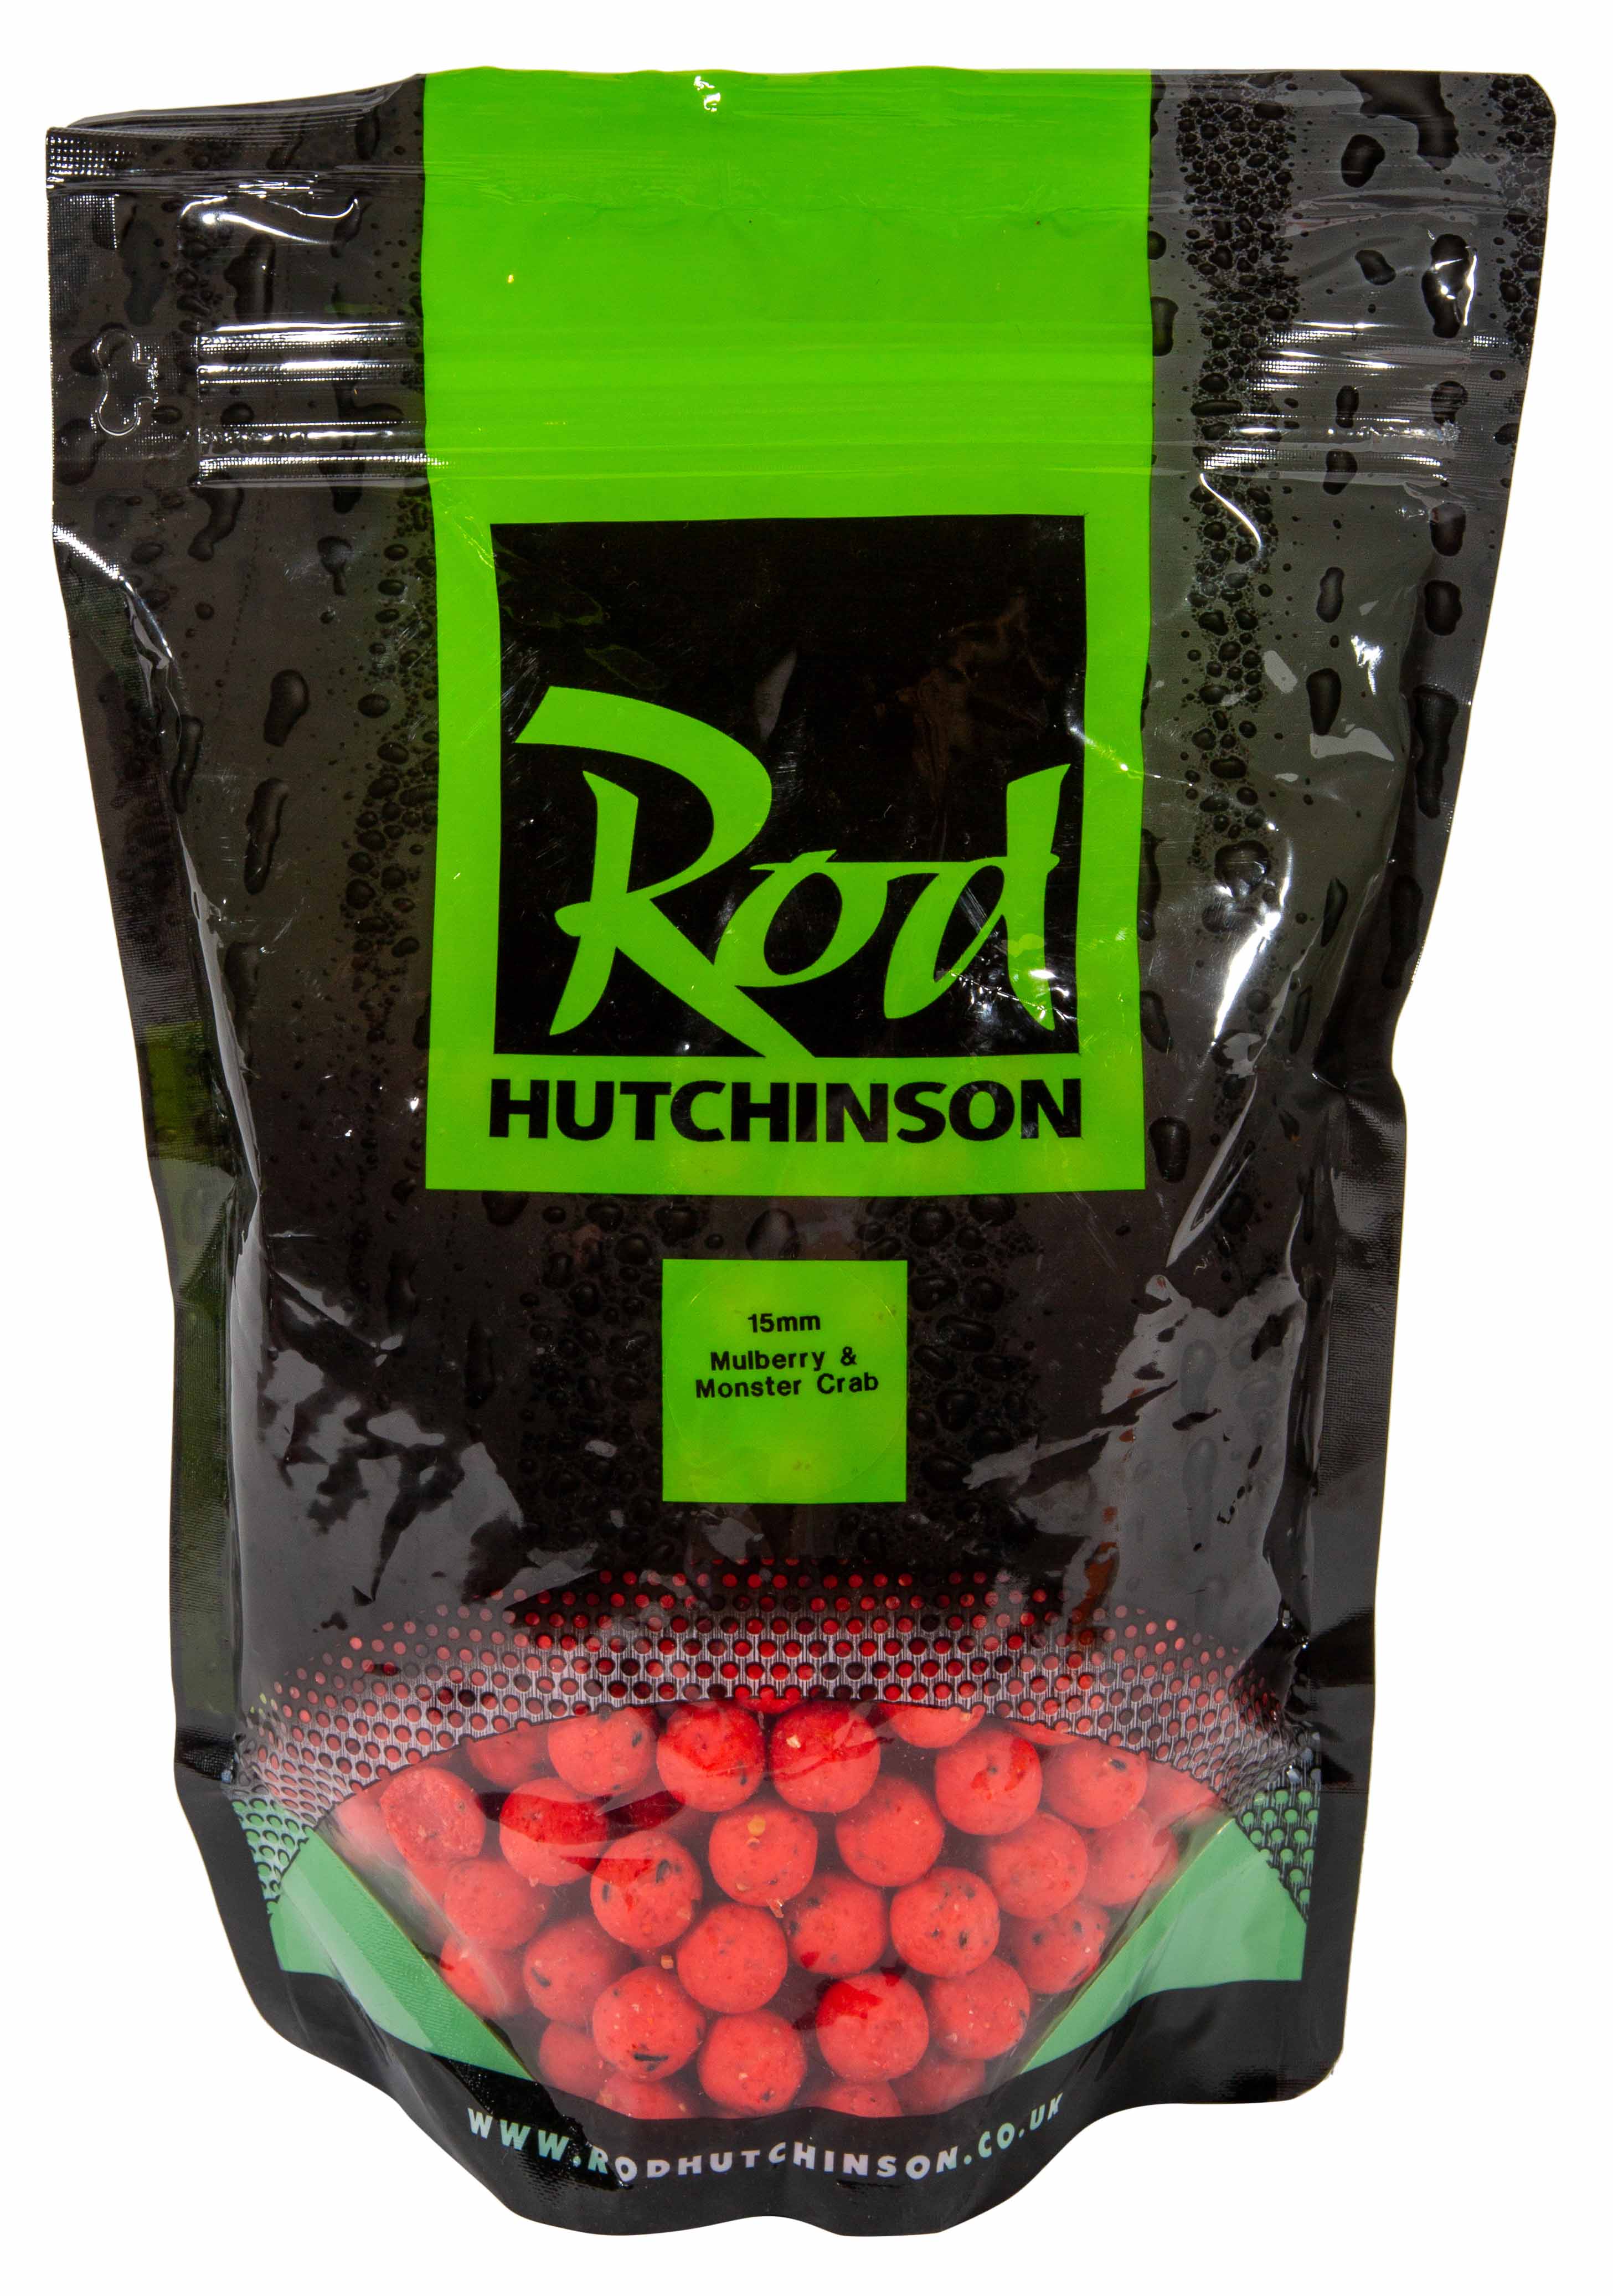 Rod Hutchinson Readymades Mulberry & Monster Crab 15mm 1kg